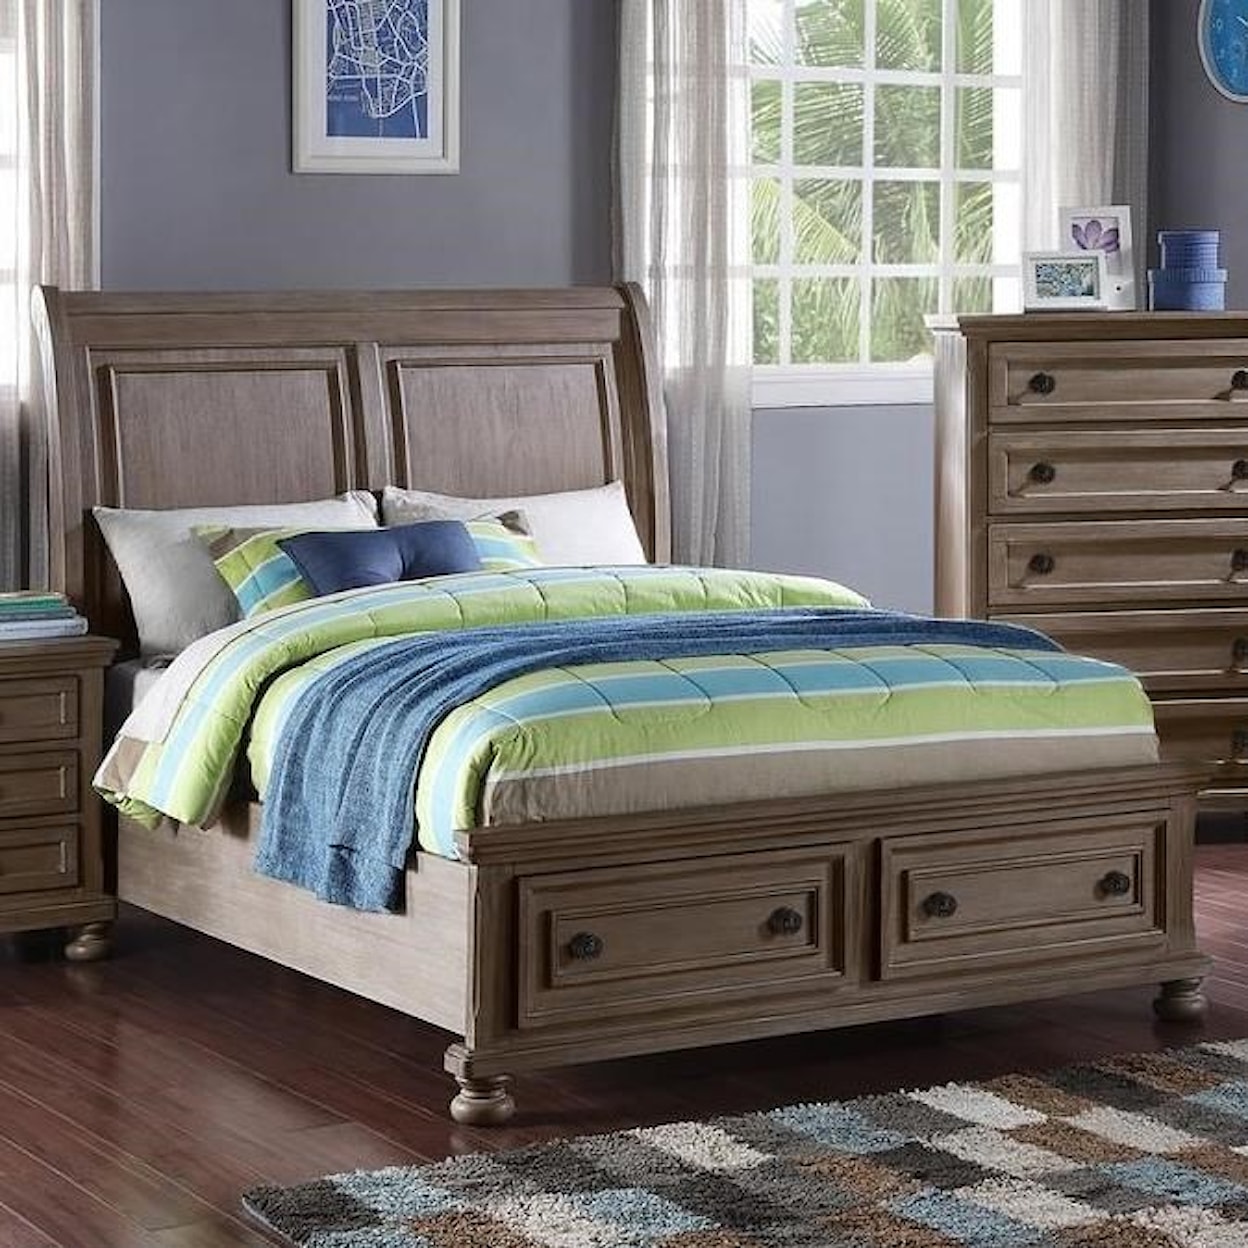 New Classic Allegra 3/3 Twin Bed